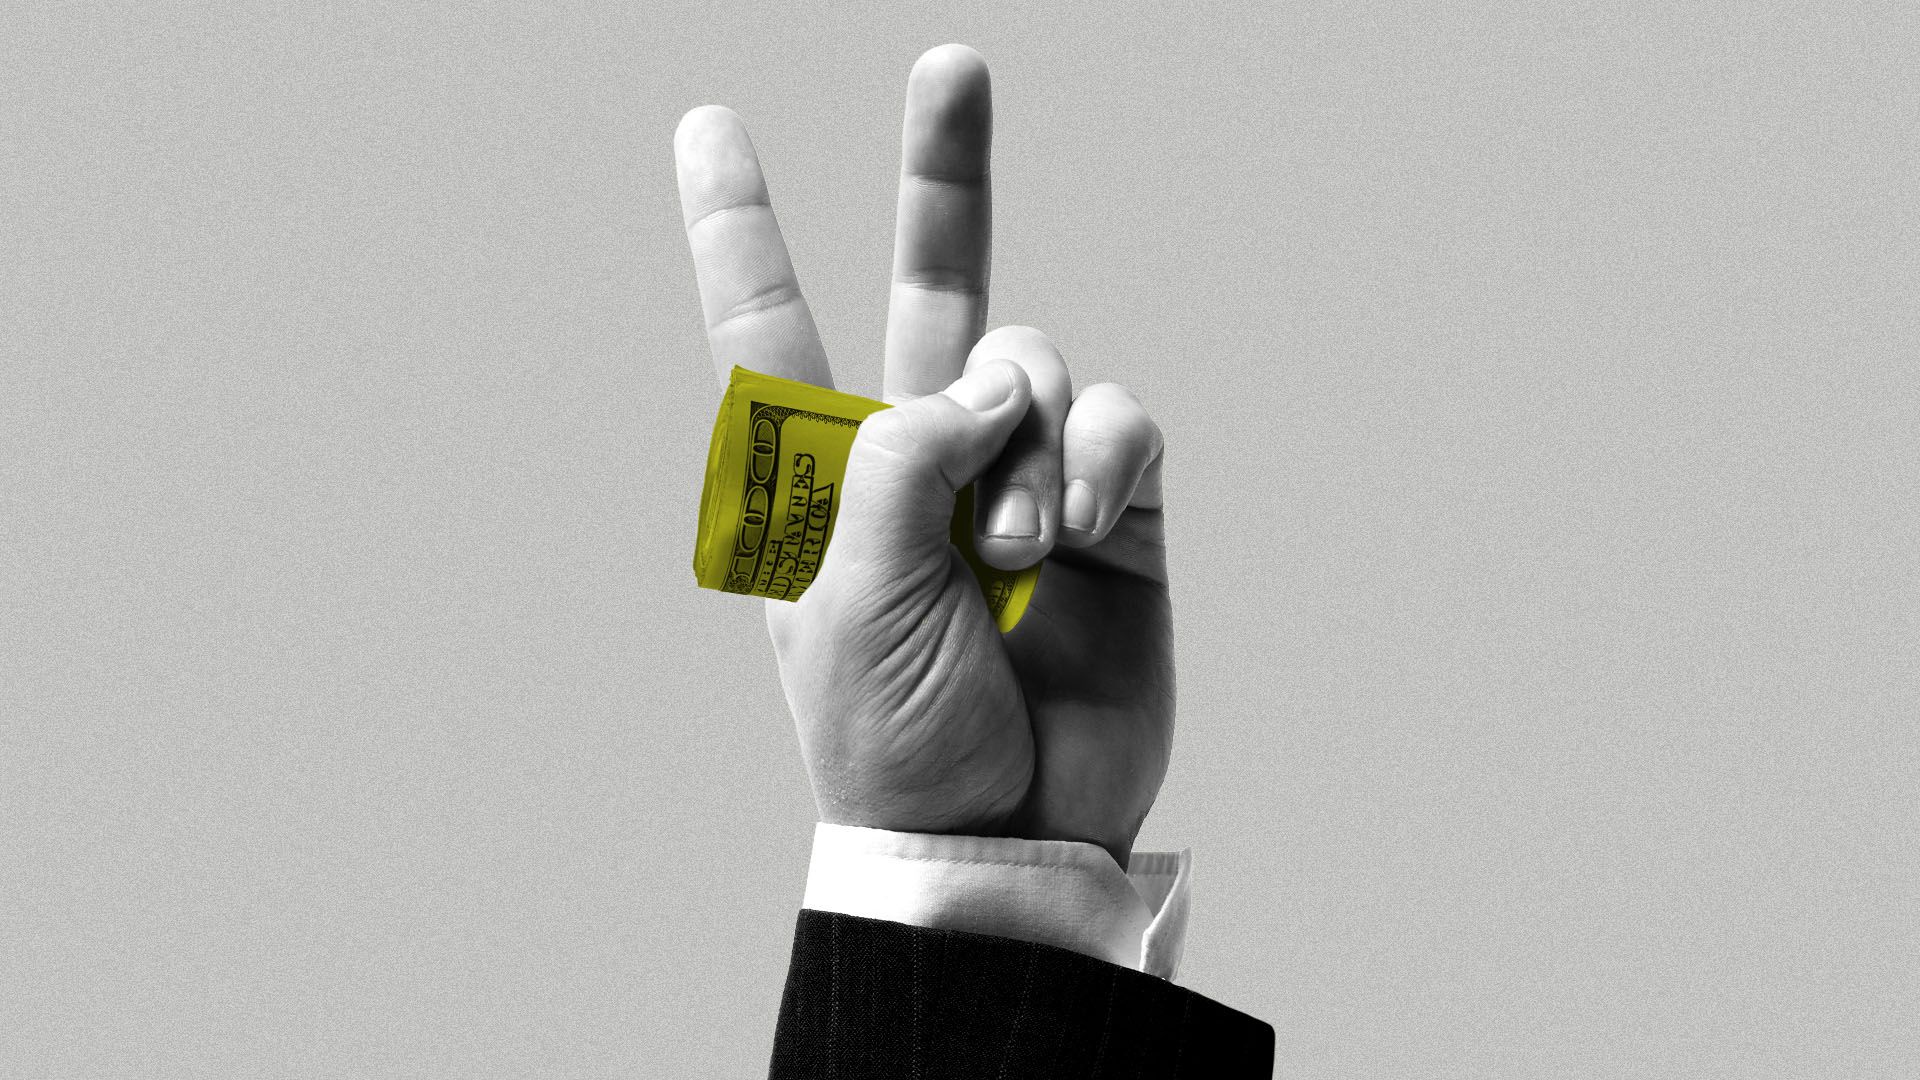 Illustration of a hand in a business suit giving a peace sign while holding a wad of hundred dollar bills